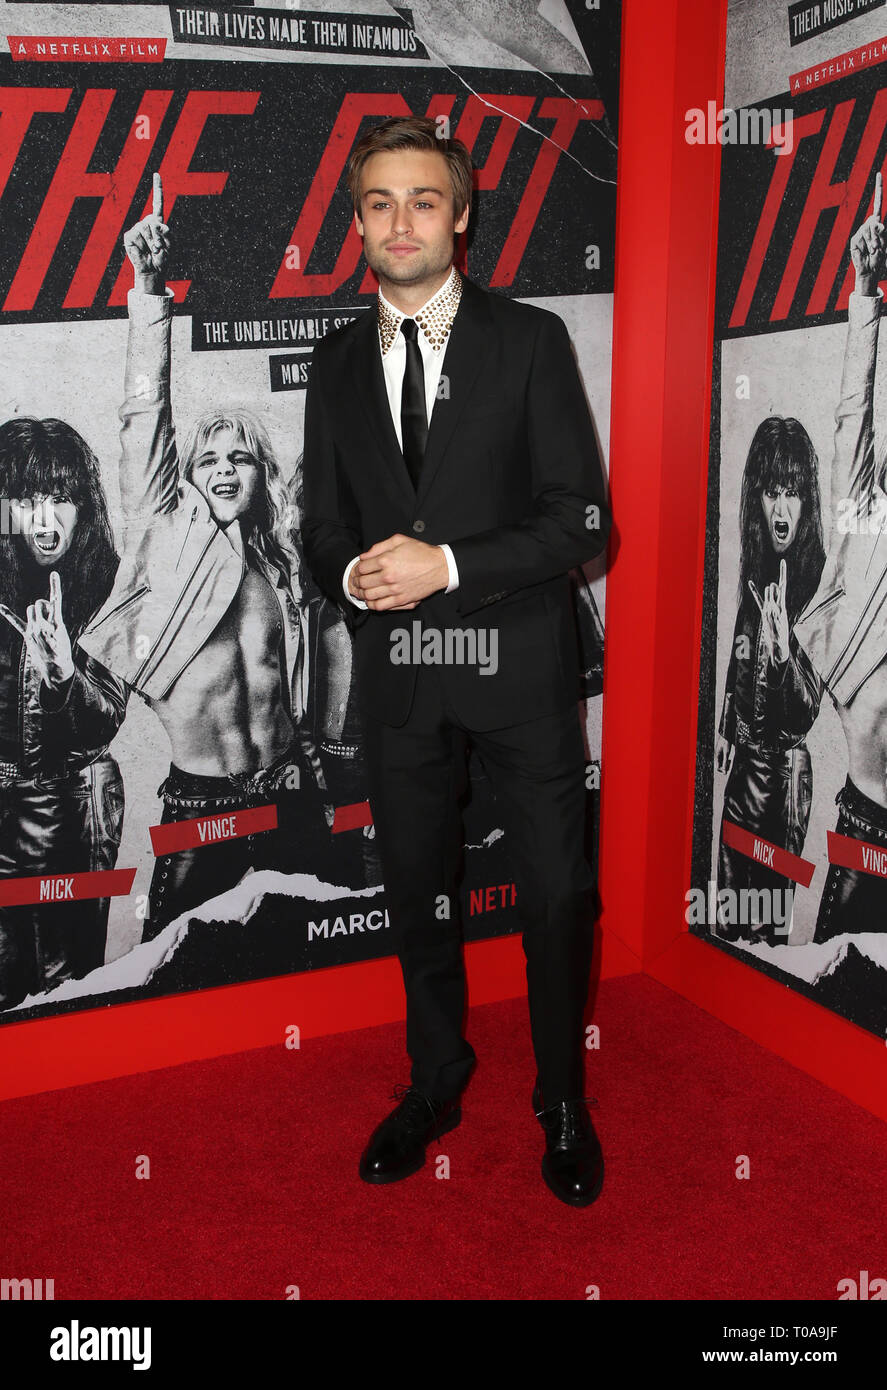 Los Angeles, Ca, USA. 18th Mar, 2019. Douglas Booth, at the NETFLIX premiere of The Dirt at The ArcLight Hollywood in Los Angeles, California on March 18, 2019. Credit: Faye Sadou/Media Punch/Alamy Live News Stock Photo